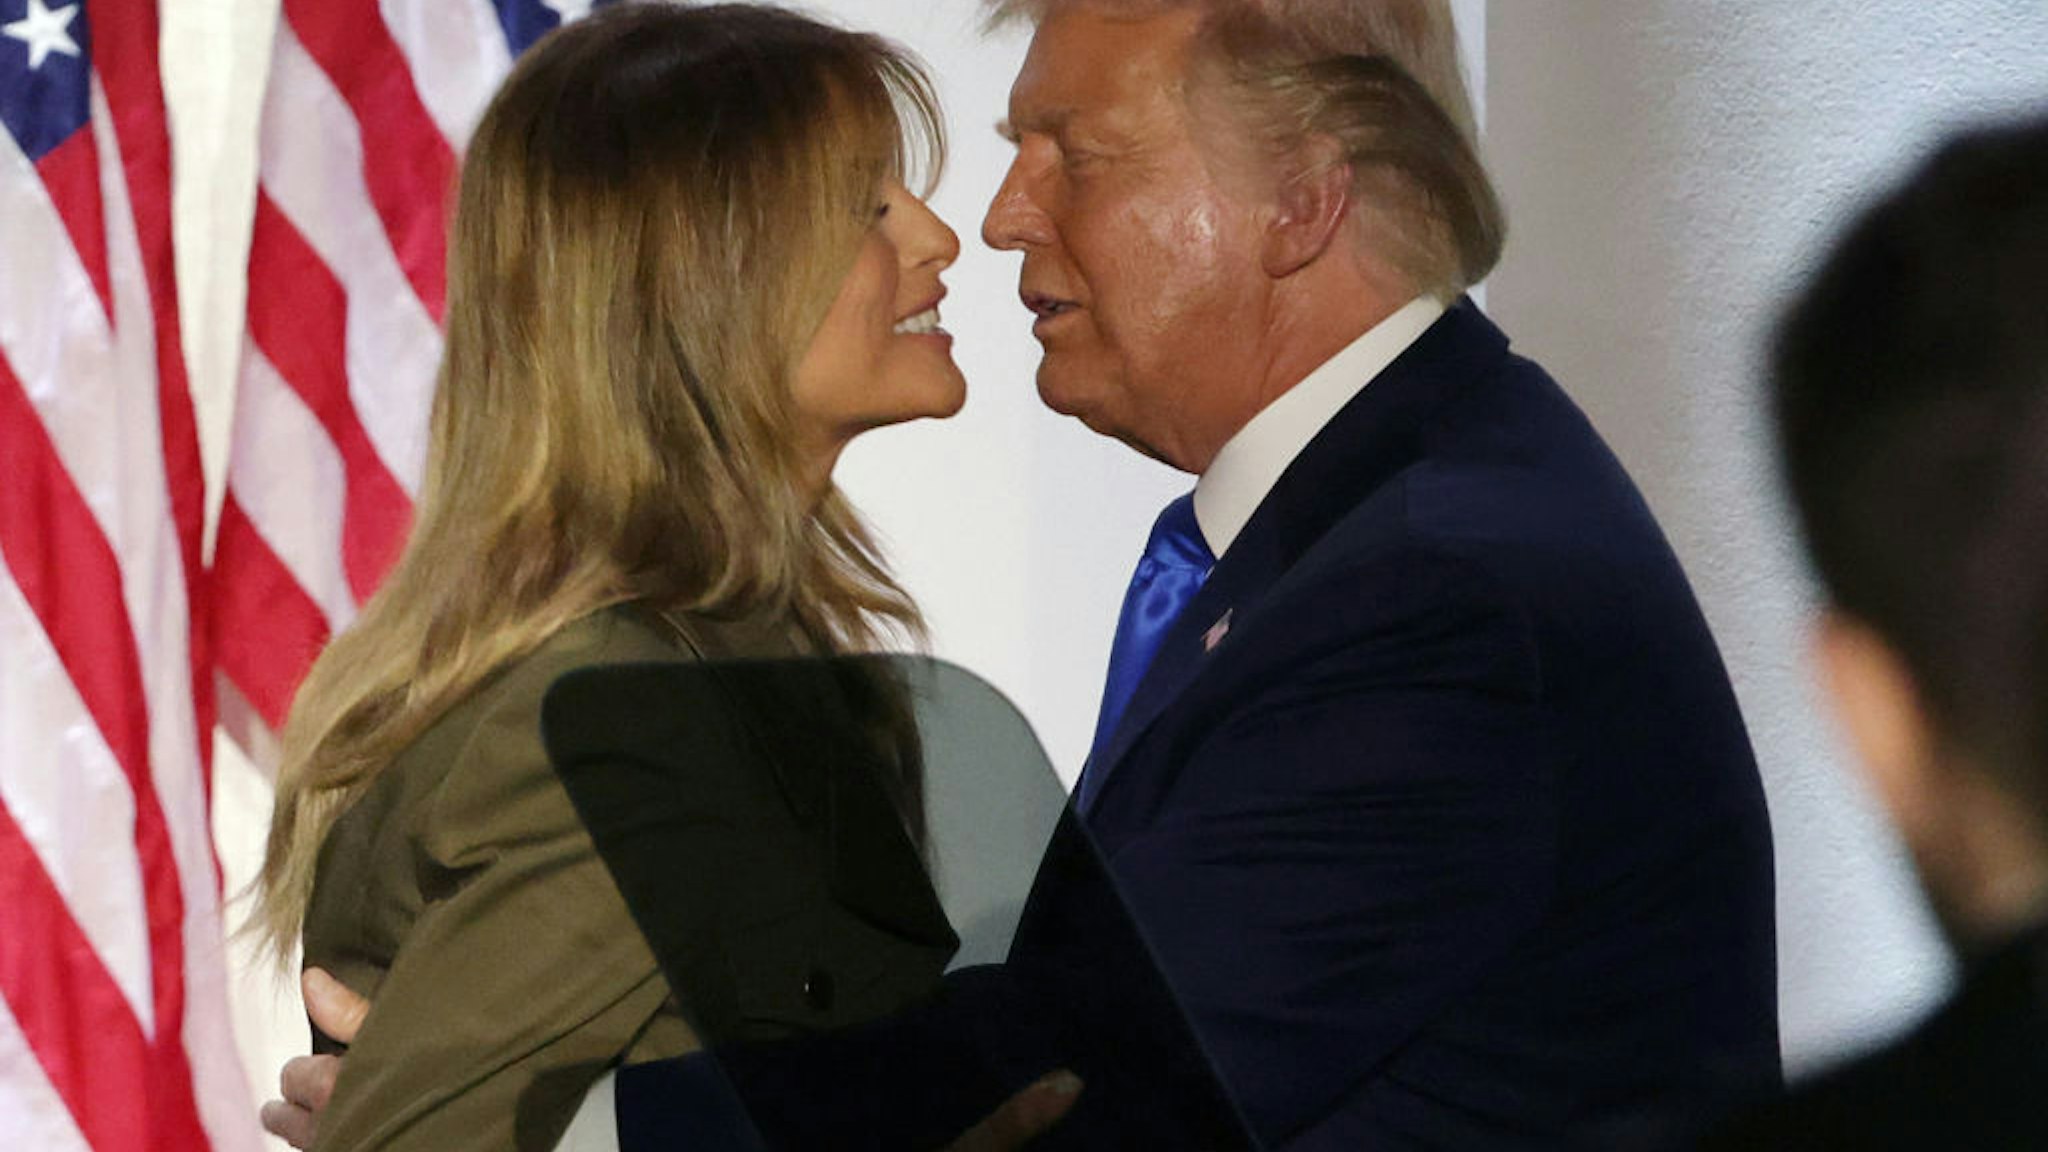 U.S. President Donald Trump and first lady Melania Trump embrace after she addressed the Republican National Convention from the Rose Garden at the White House on August 25, 2020 in Washington, DC.